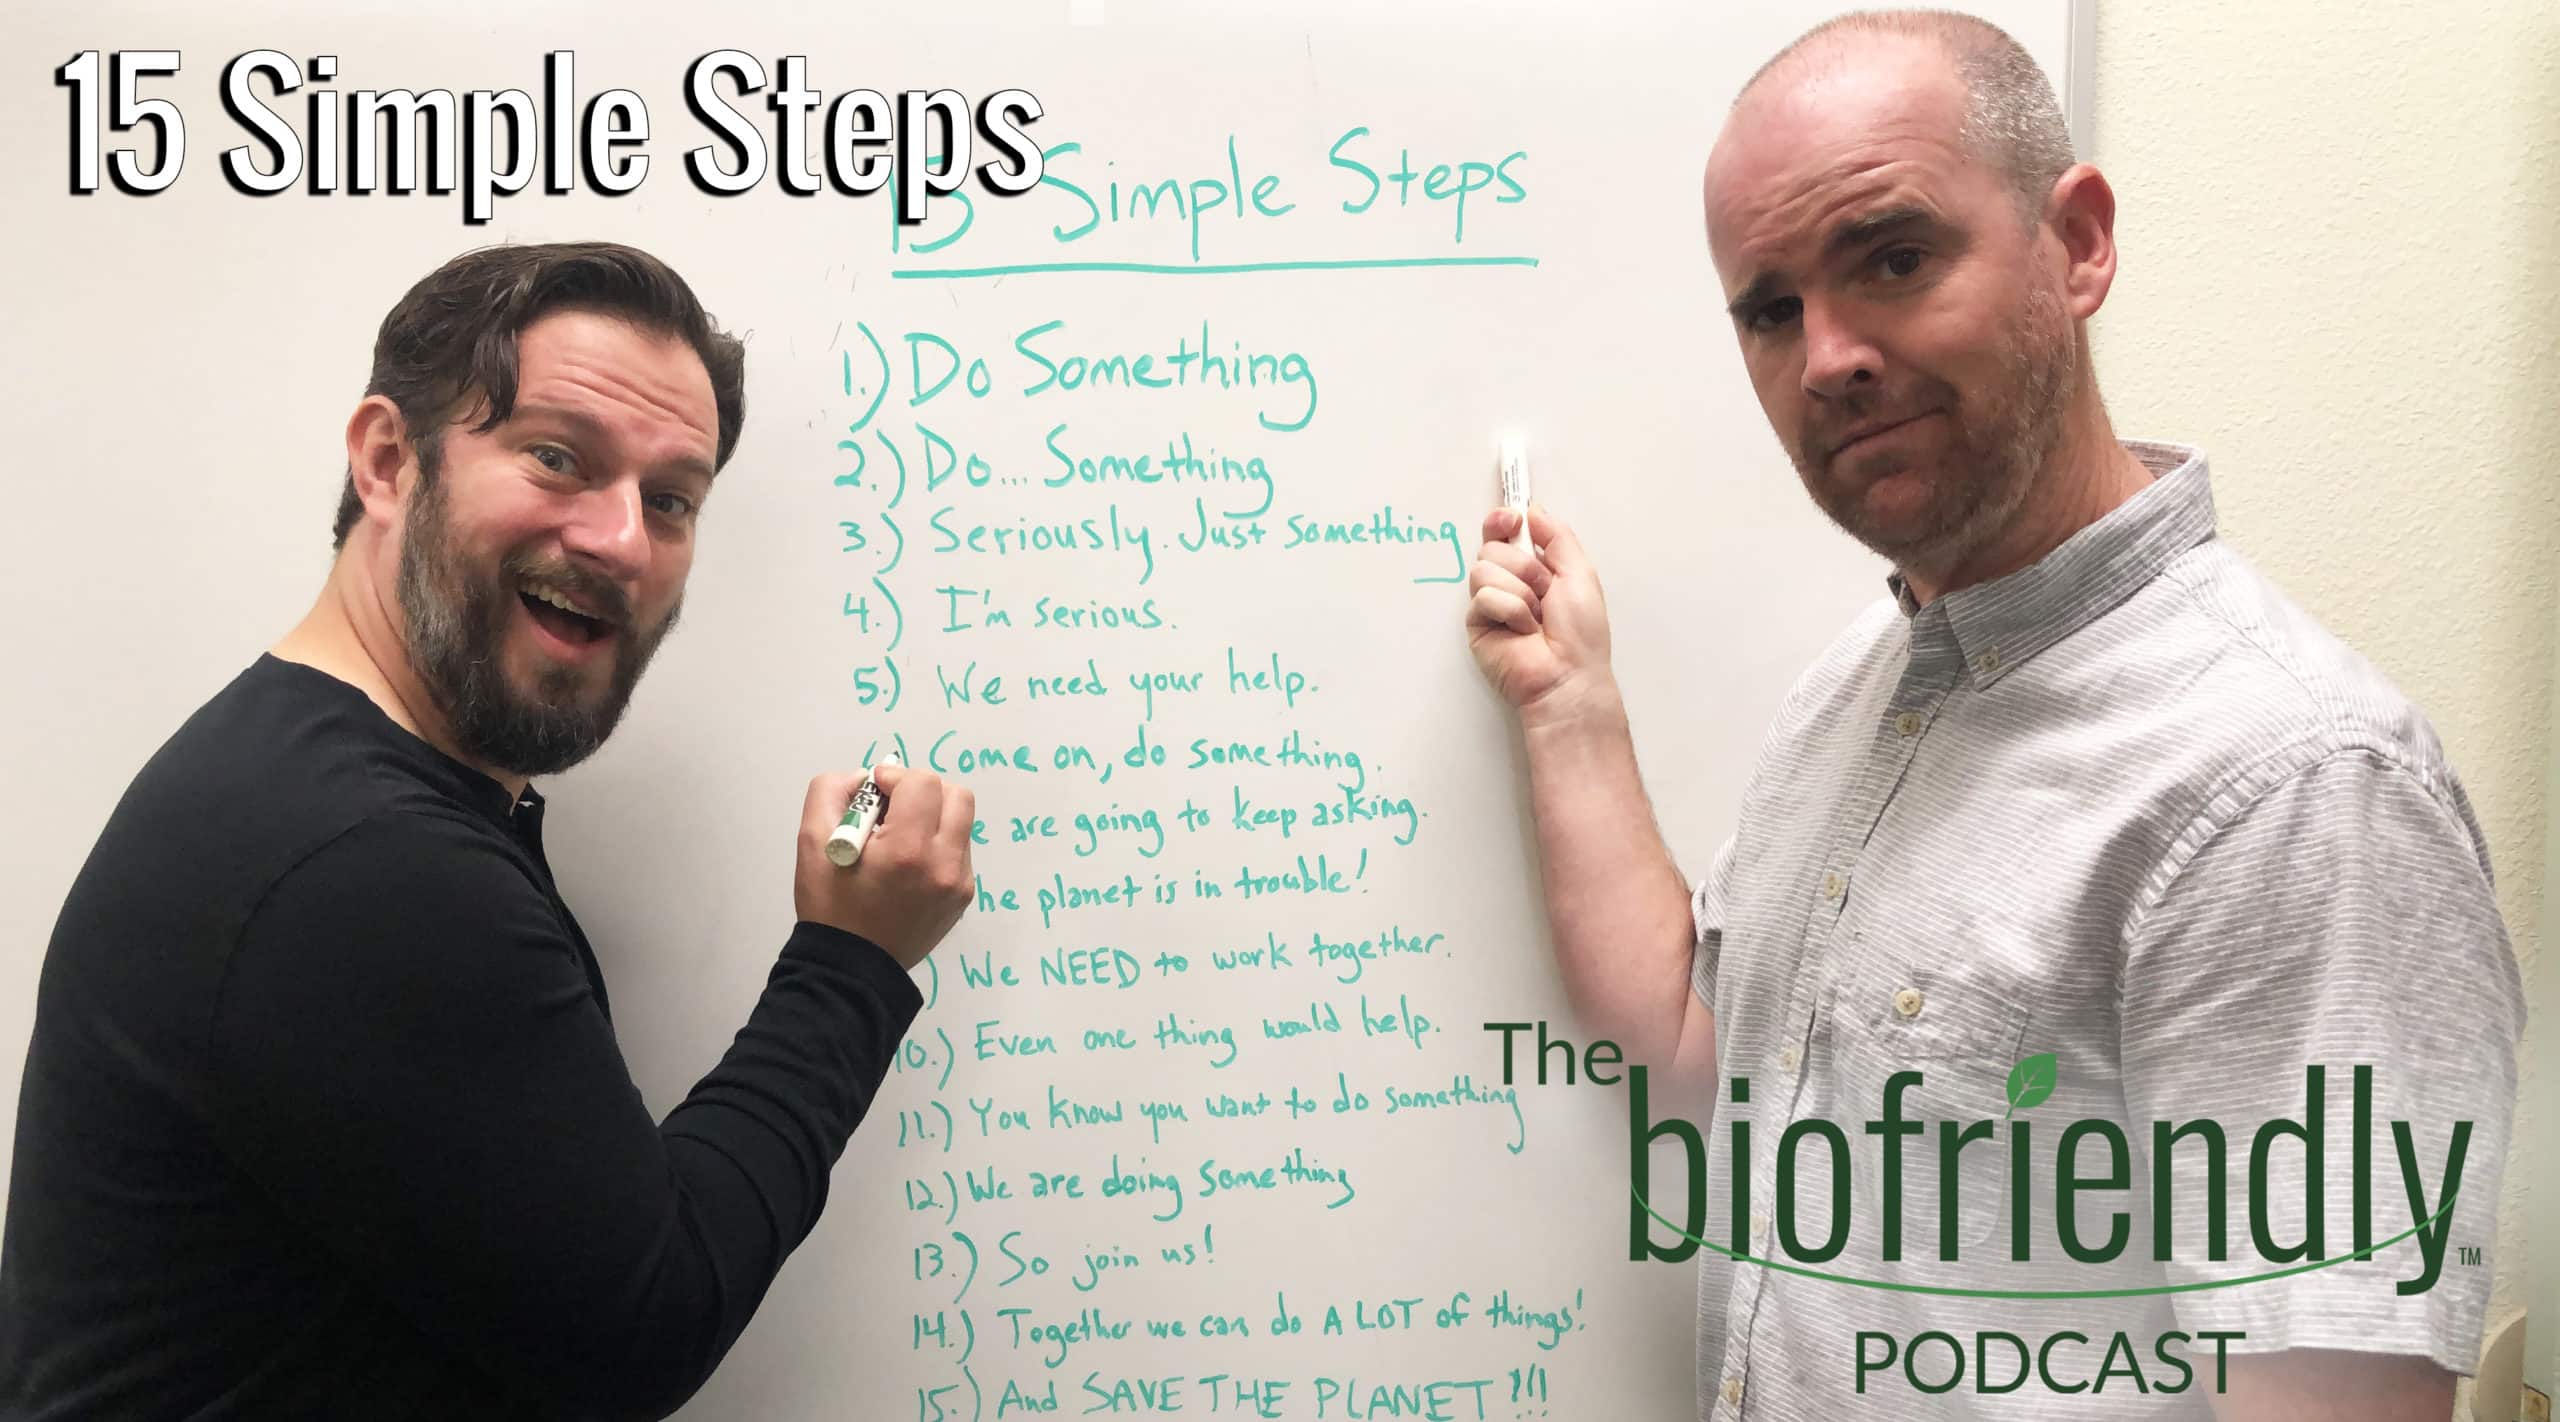 The Biofriendly Podcast - Episode 19 - 15 Simple Steps